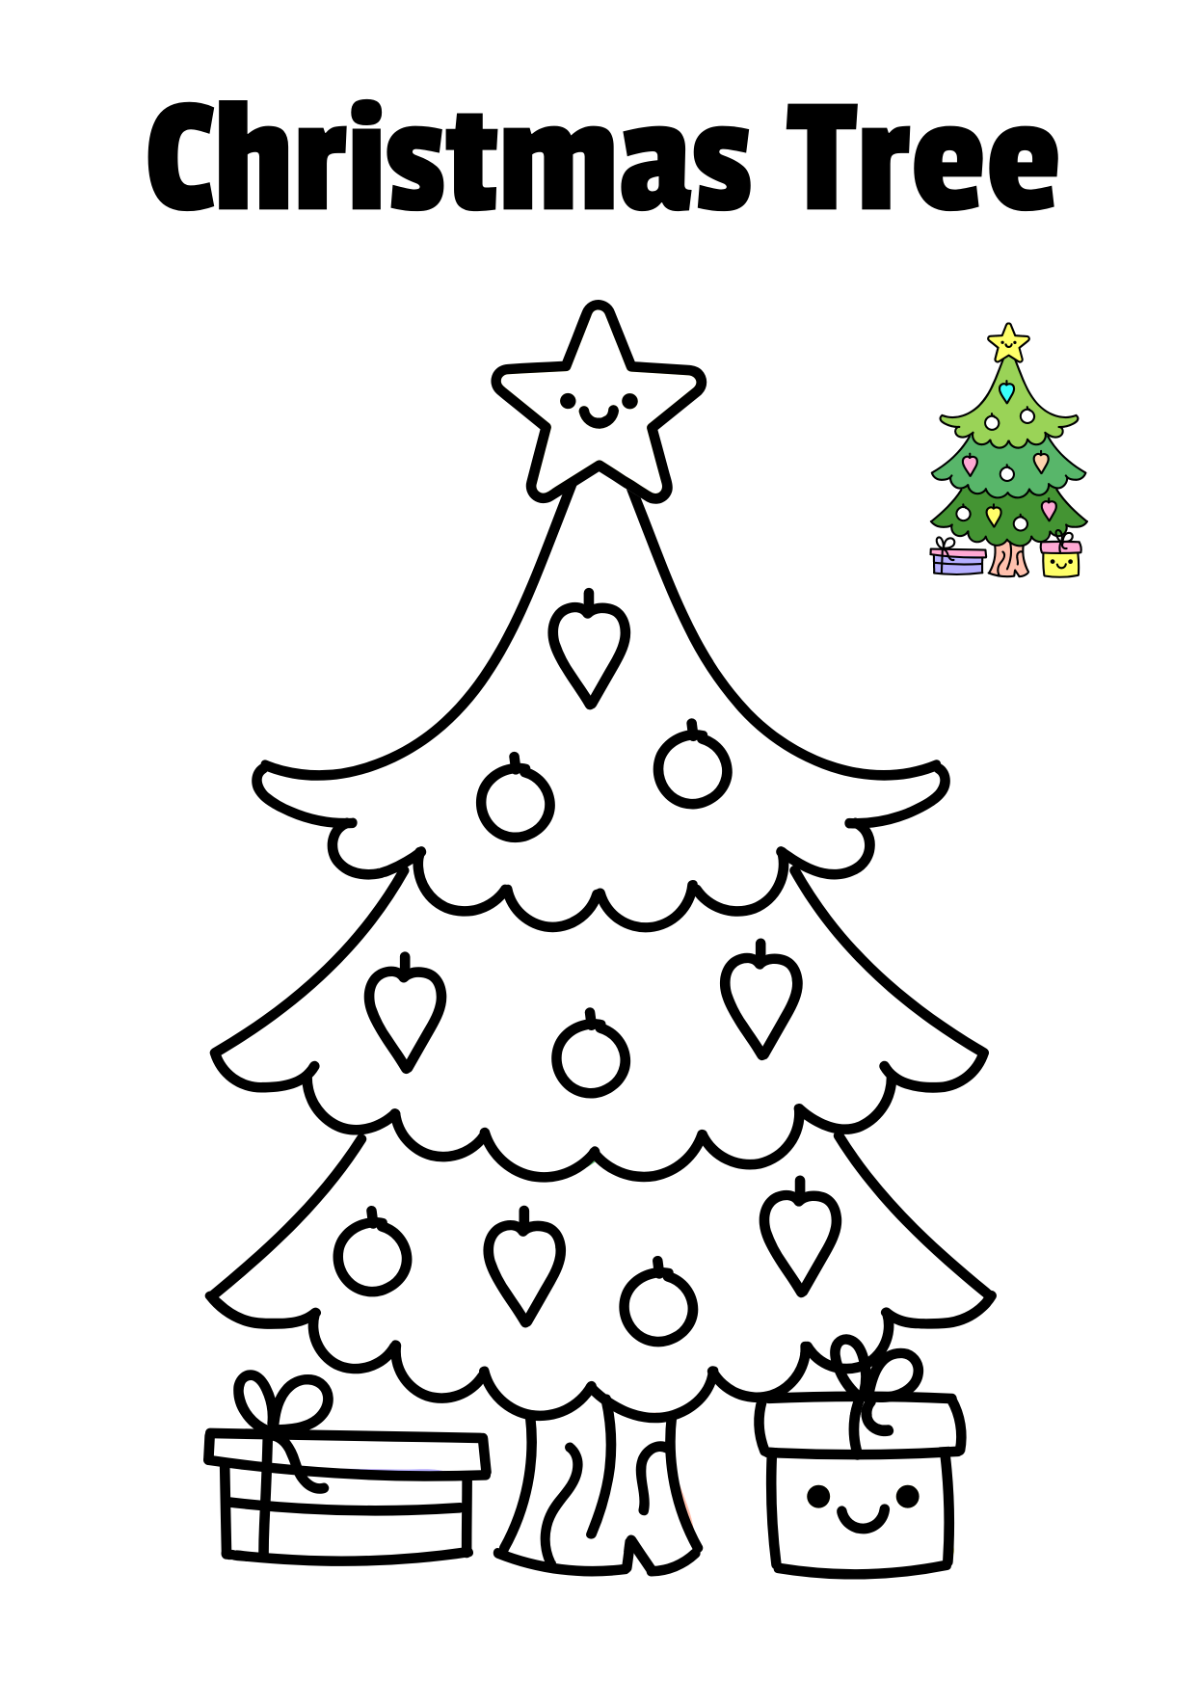 Free Christmas Tree Coloring Page Template